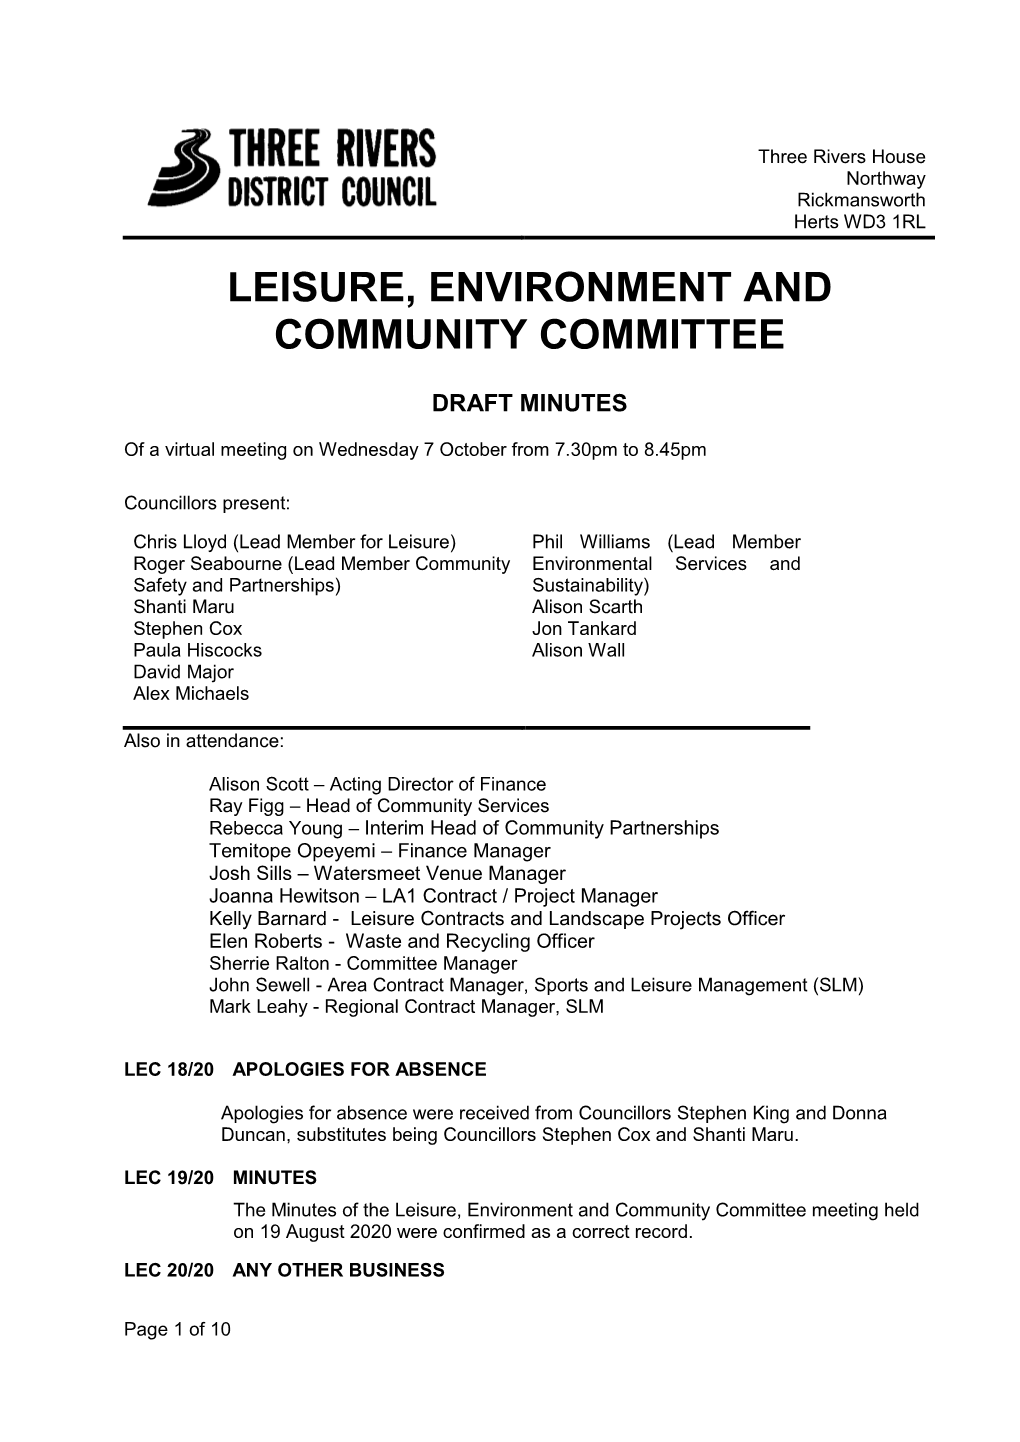 Leisure, Environment and Community Committee